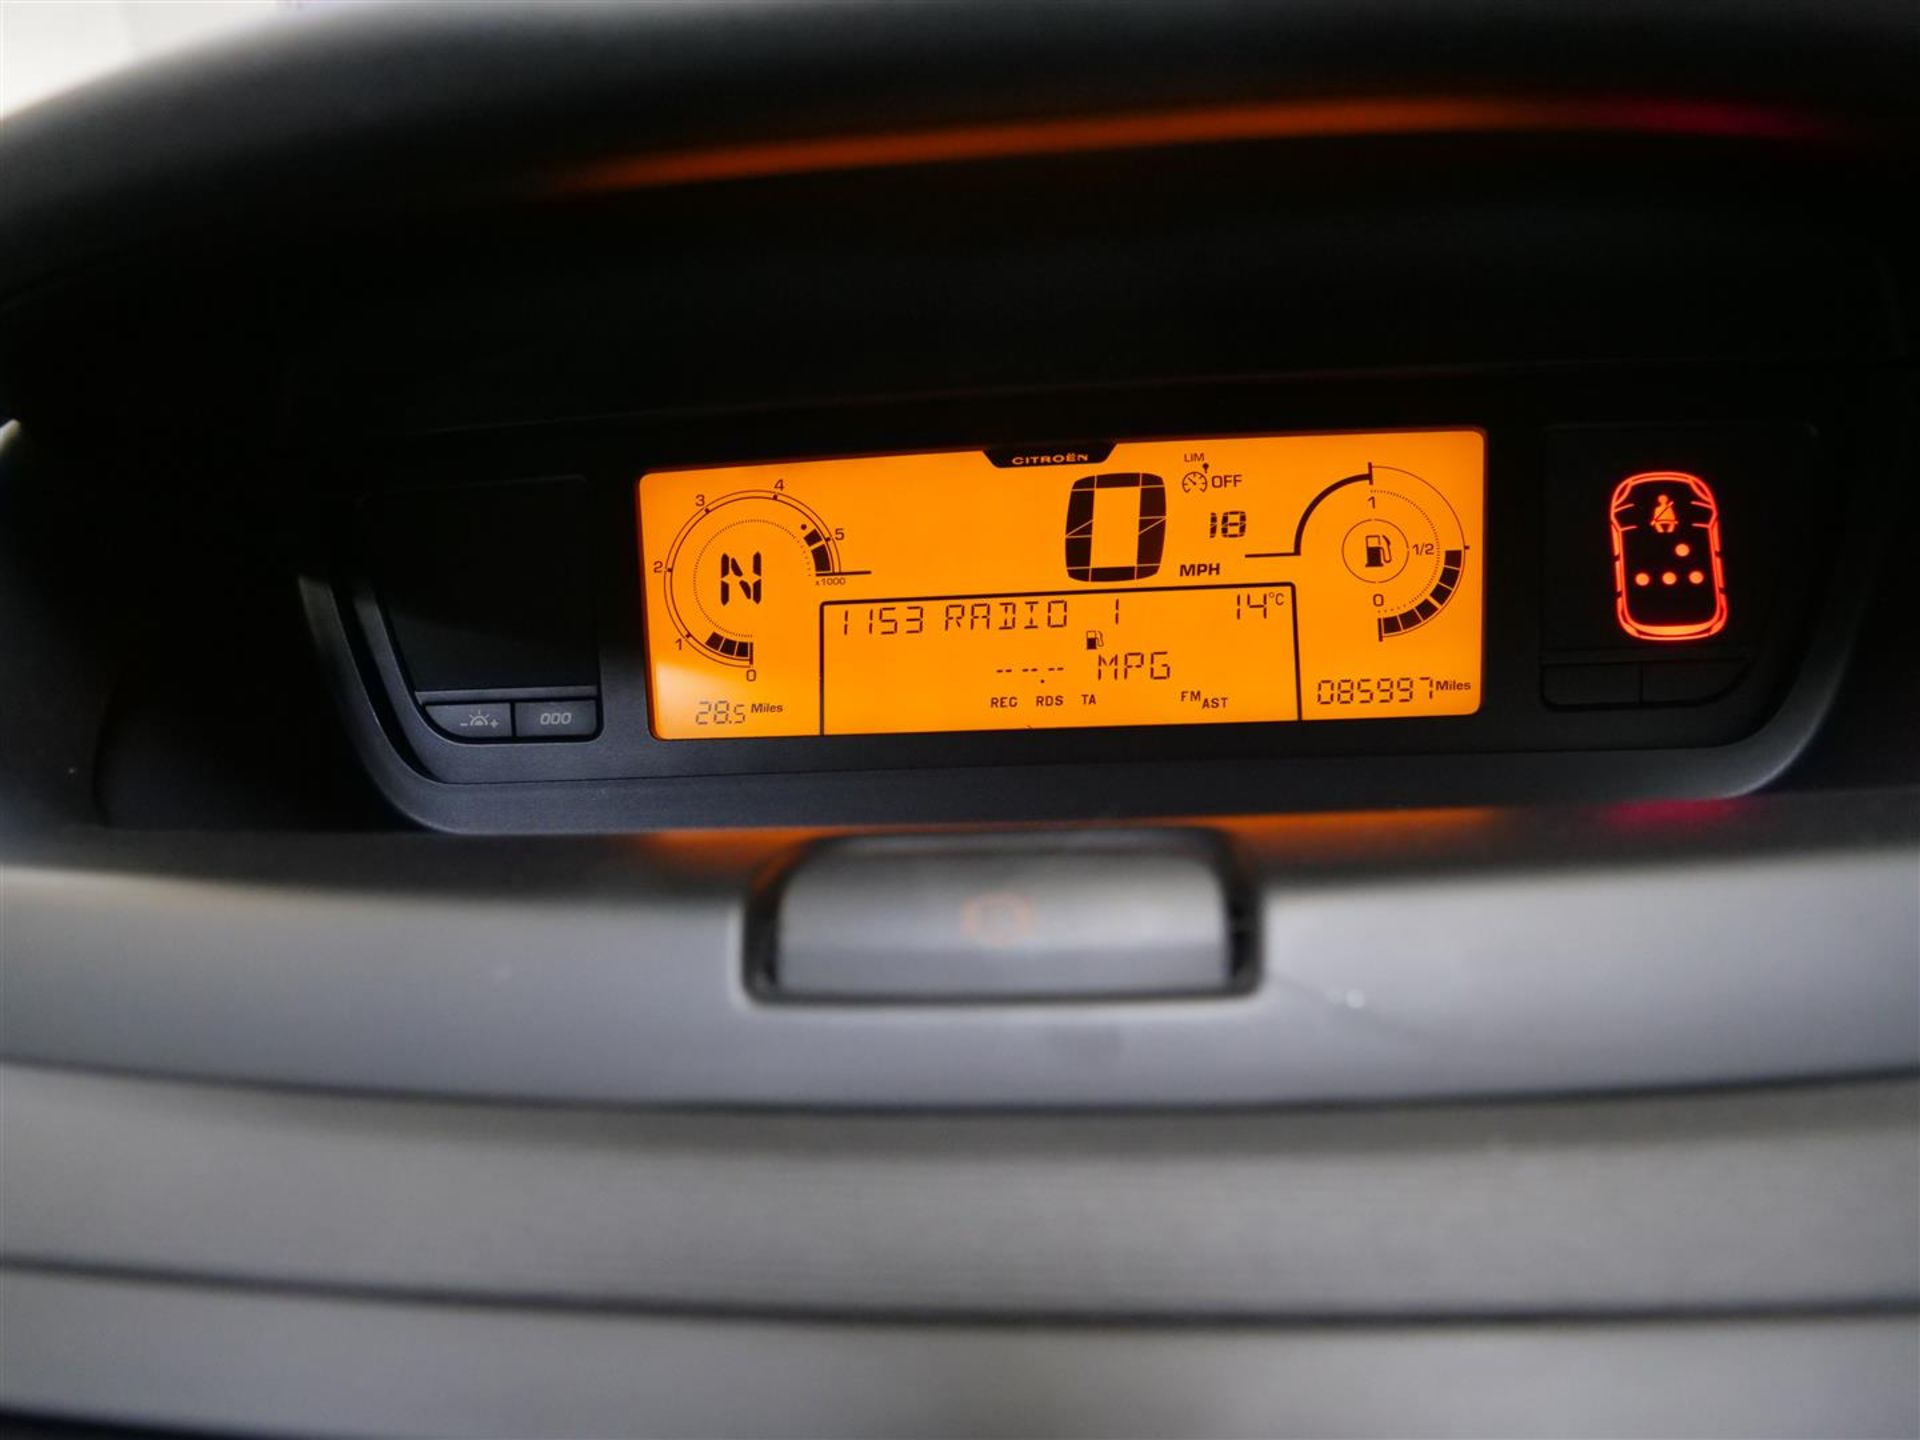 10 10 Citroen C4 Picasso VTR+ HDI - Image 7 of 41